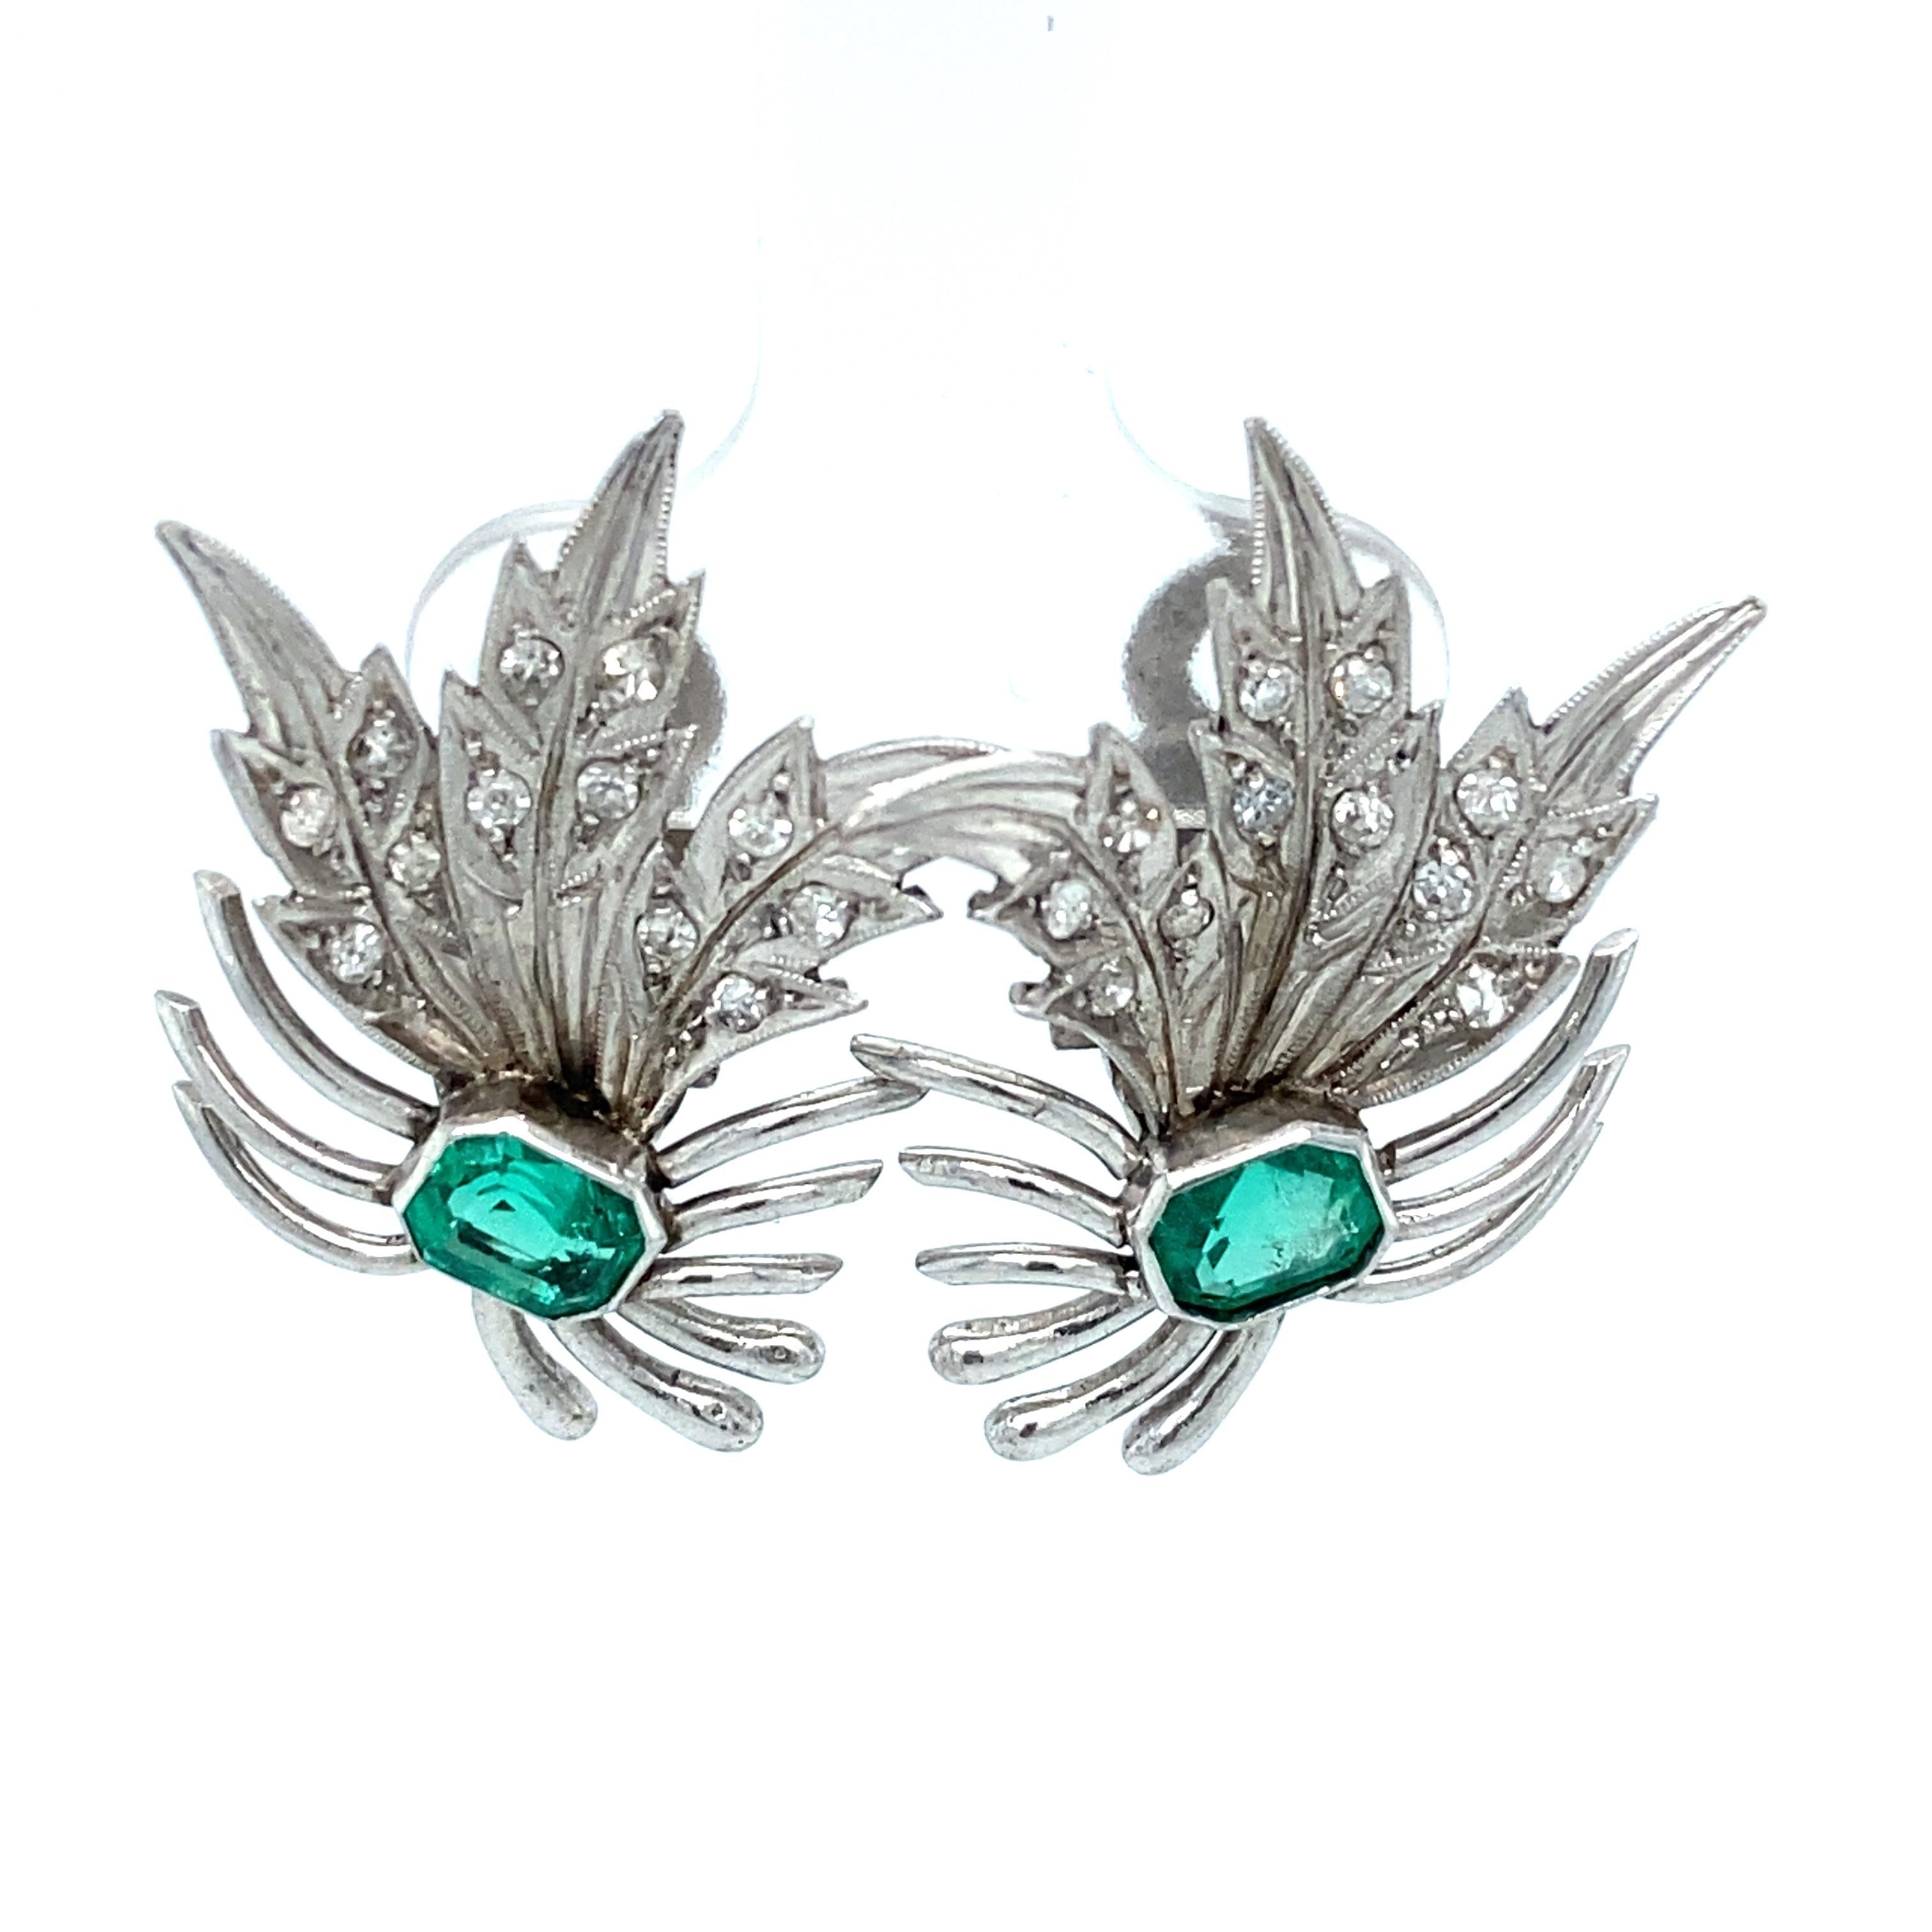 Item Details: These unique retro earrings have a feather design with emeralds and diamonds.

Circa: 1960s
Metal Type:  18 karat white gold
Weight: 7.6 grams
Size: 1 inch length 

Emerald Details:

Carat: Approximately 1.0 carat total weight
Shape: